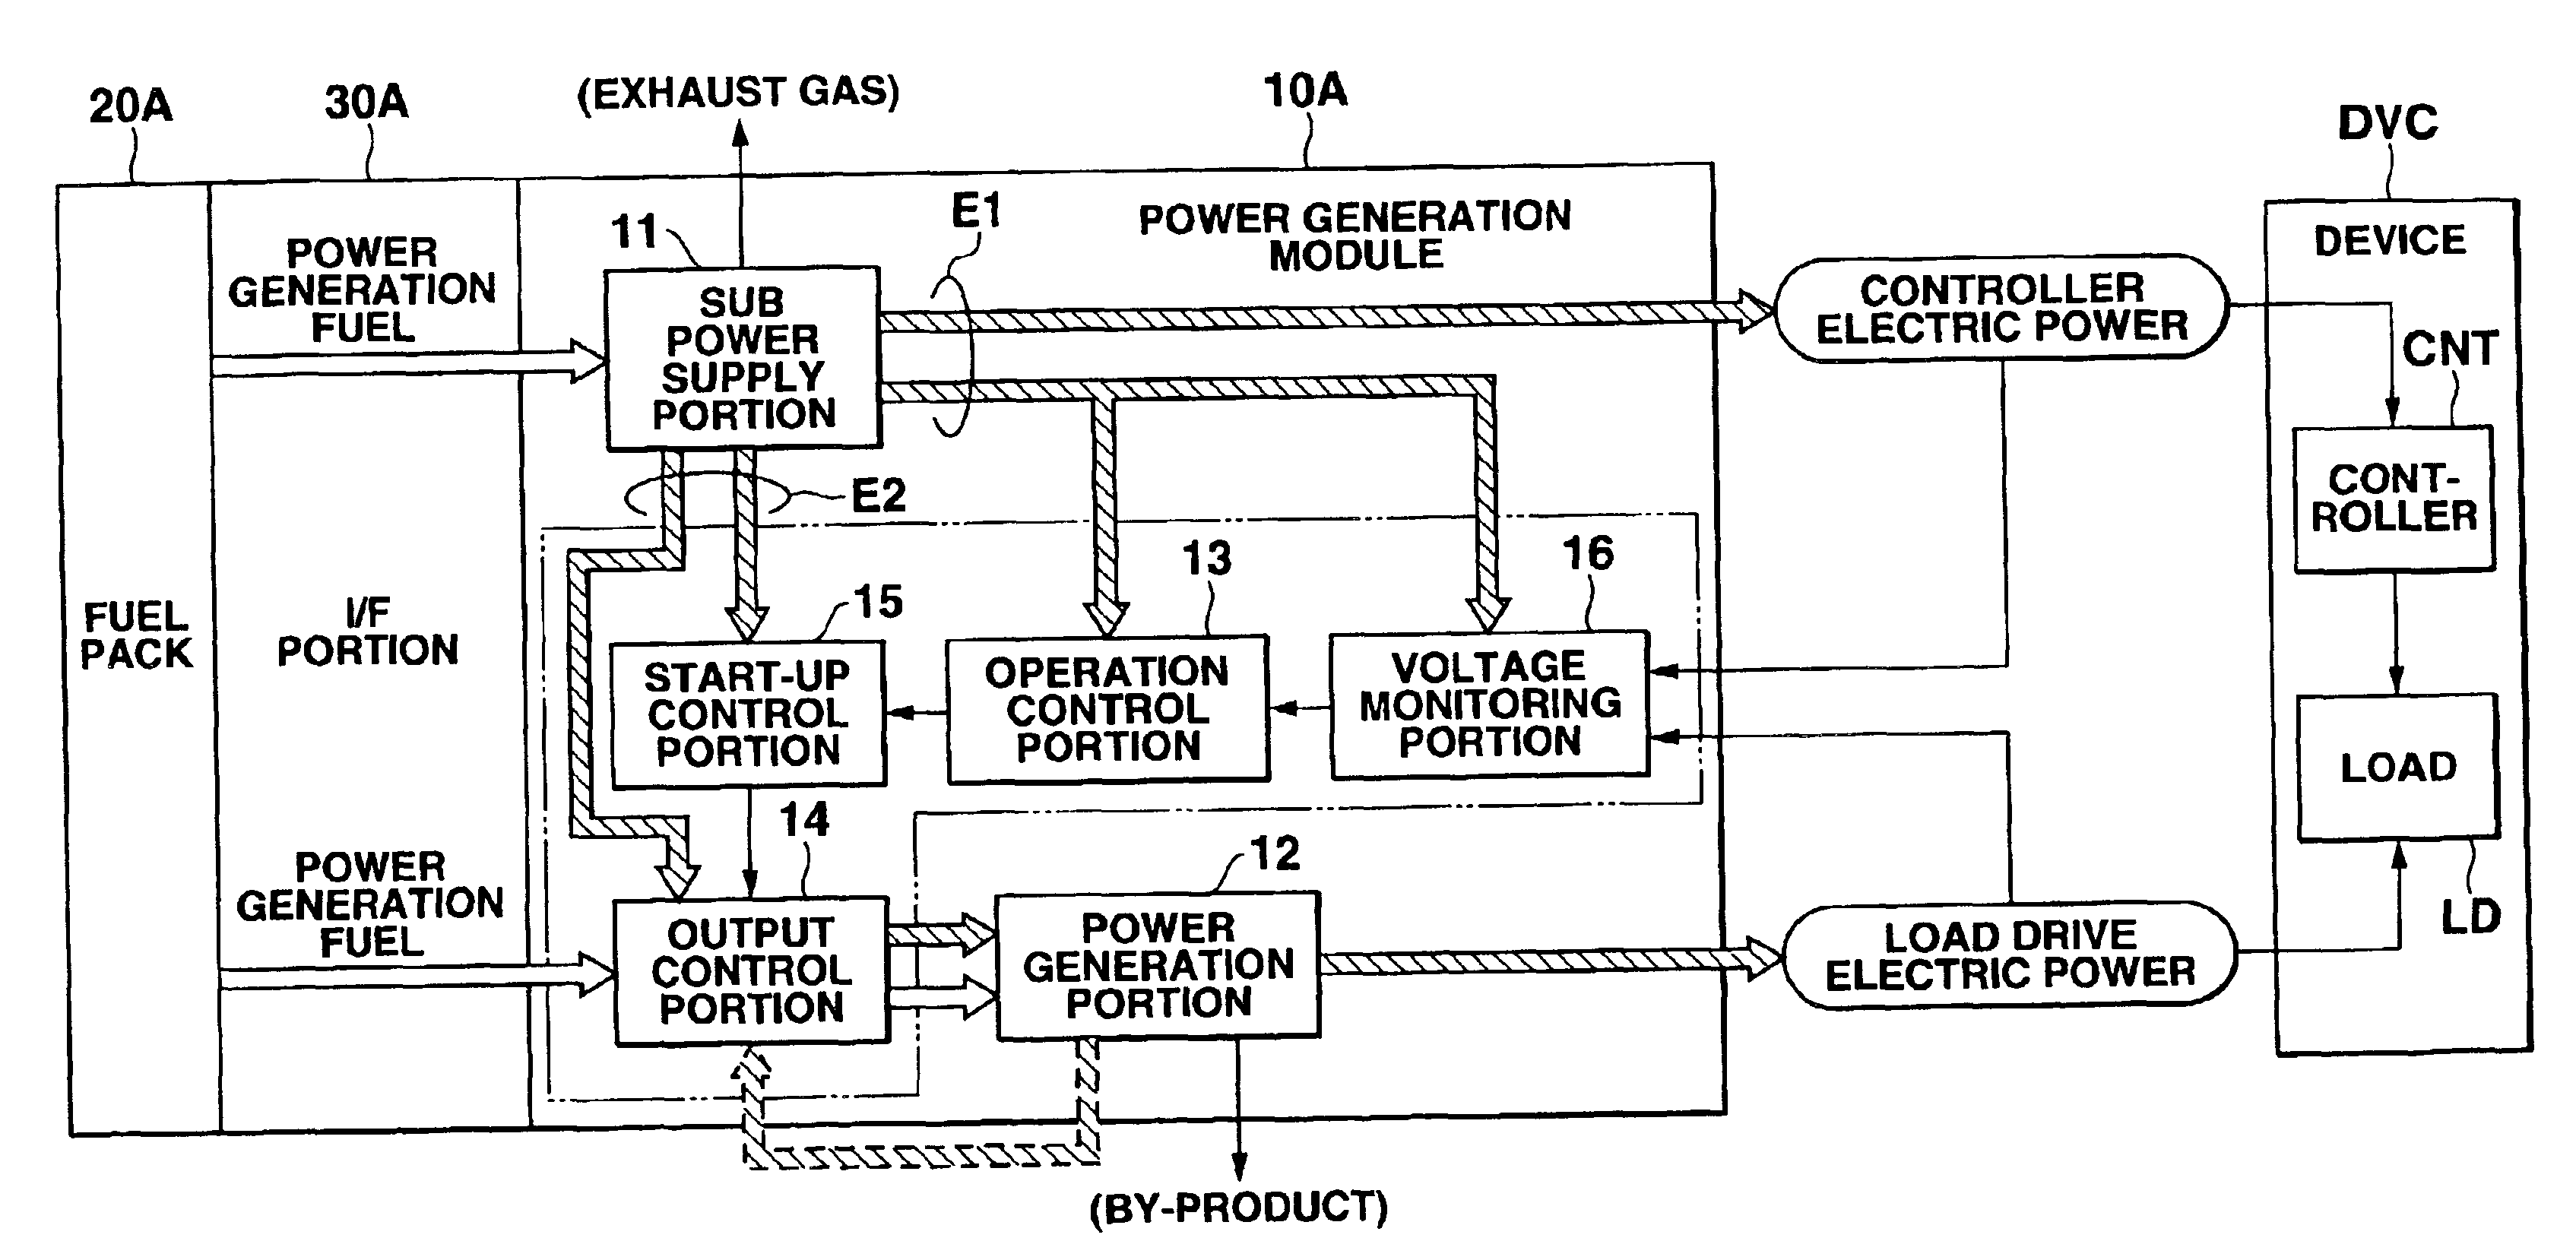 Power supply system, fuel pack constituting the system, and device driven by power generator and power supply system